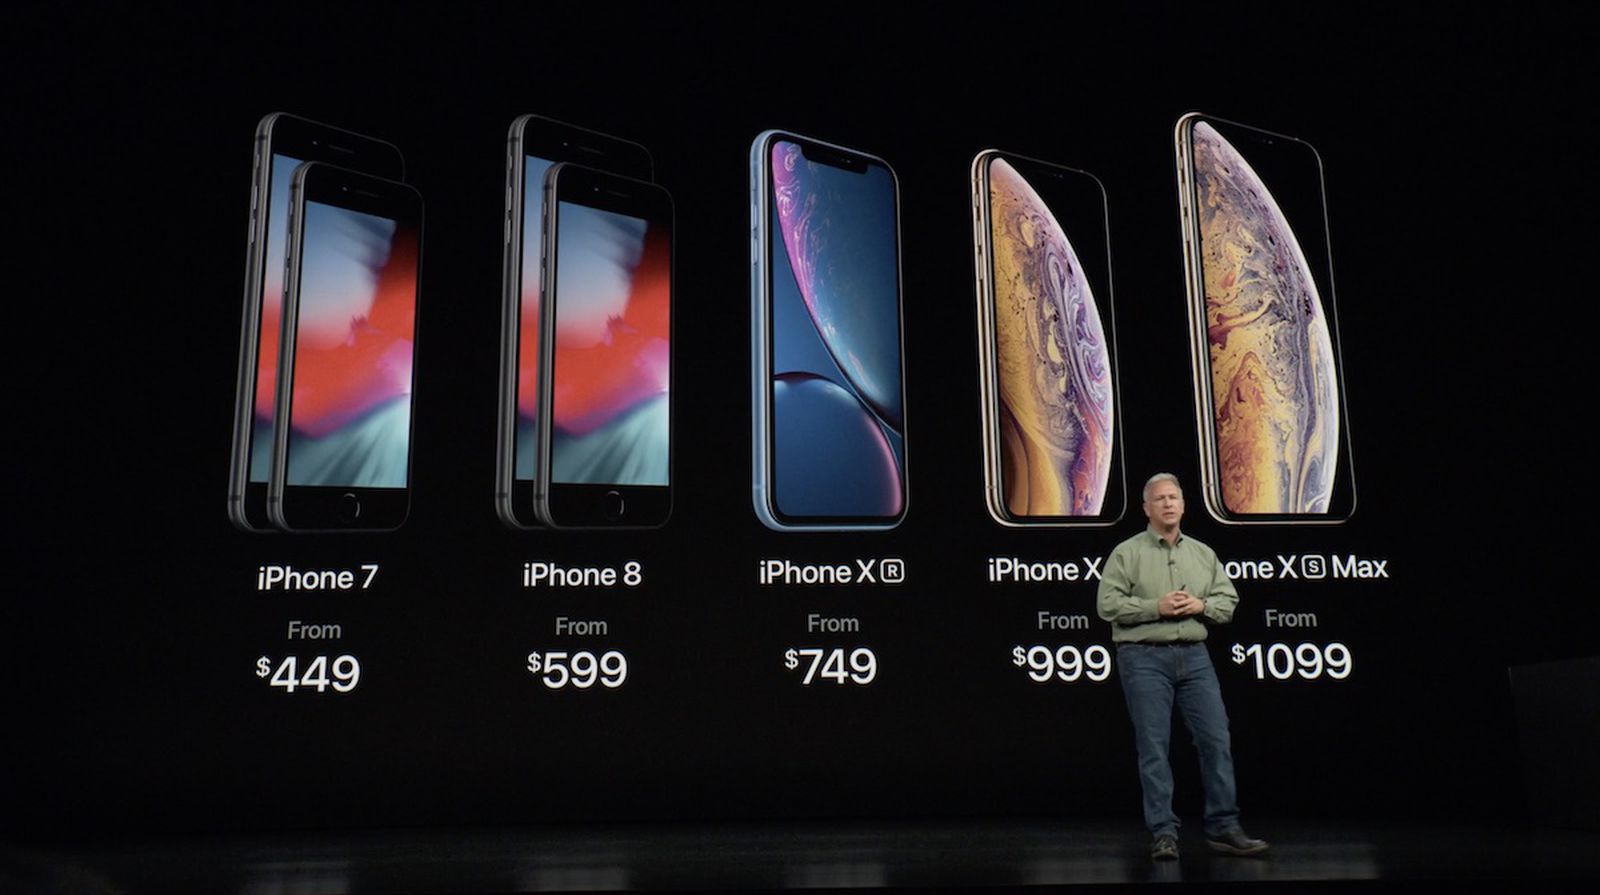 Tim Cook on iPhone Prices: 'We Want to Serve Everyone'